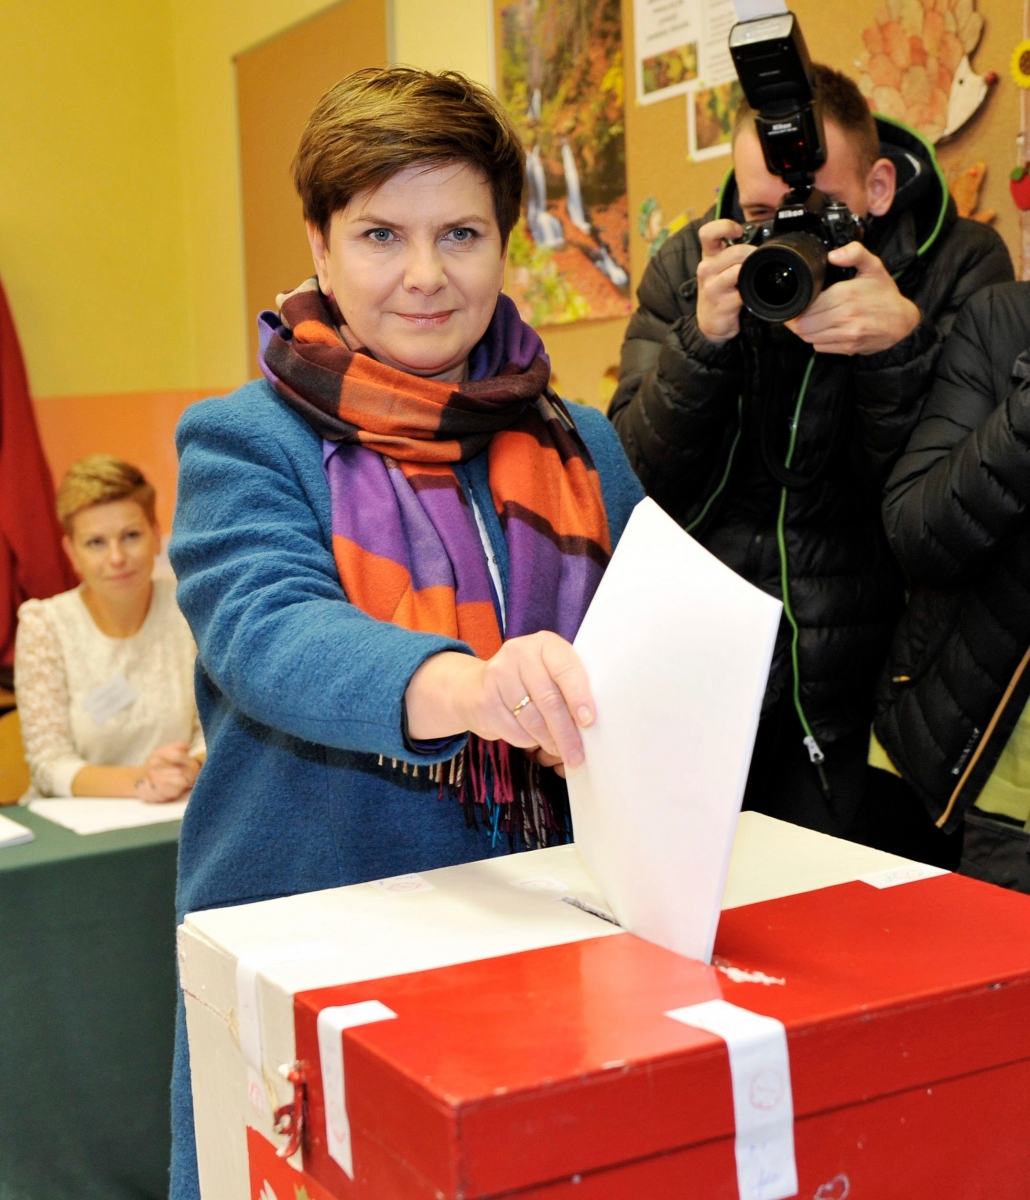 Beata Szydlo, candidate for prime minister of the conservative opposition Law and Justice party in Poland's general elections casts her ballot in Przecieszyn, in Poland, on Sunday, Oct. 25, 2015. Mixing Catholic values with welfare policy, the Law and Justice was leading the polls, ahead of the ruling pro-business Civic Platform party, just days before the vote. (AP Photo) POLAND OUT Poland Elections